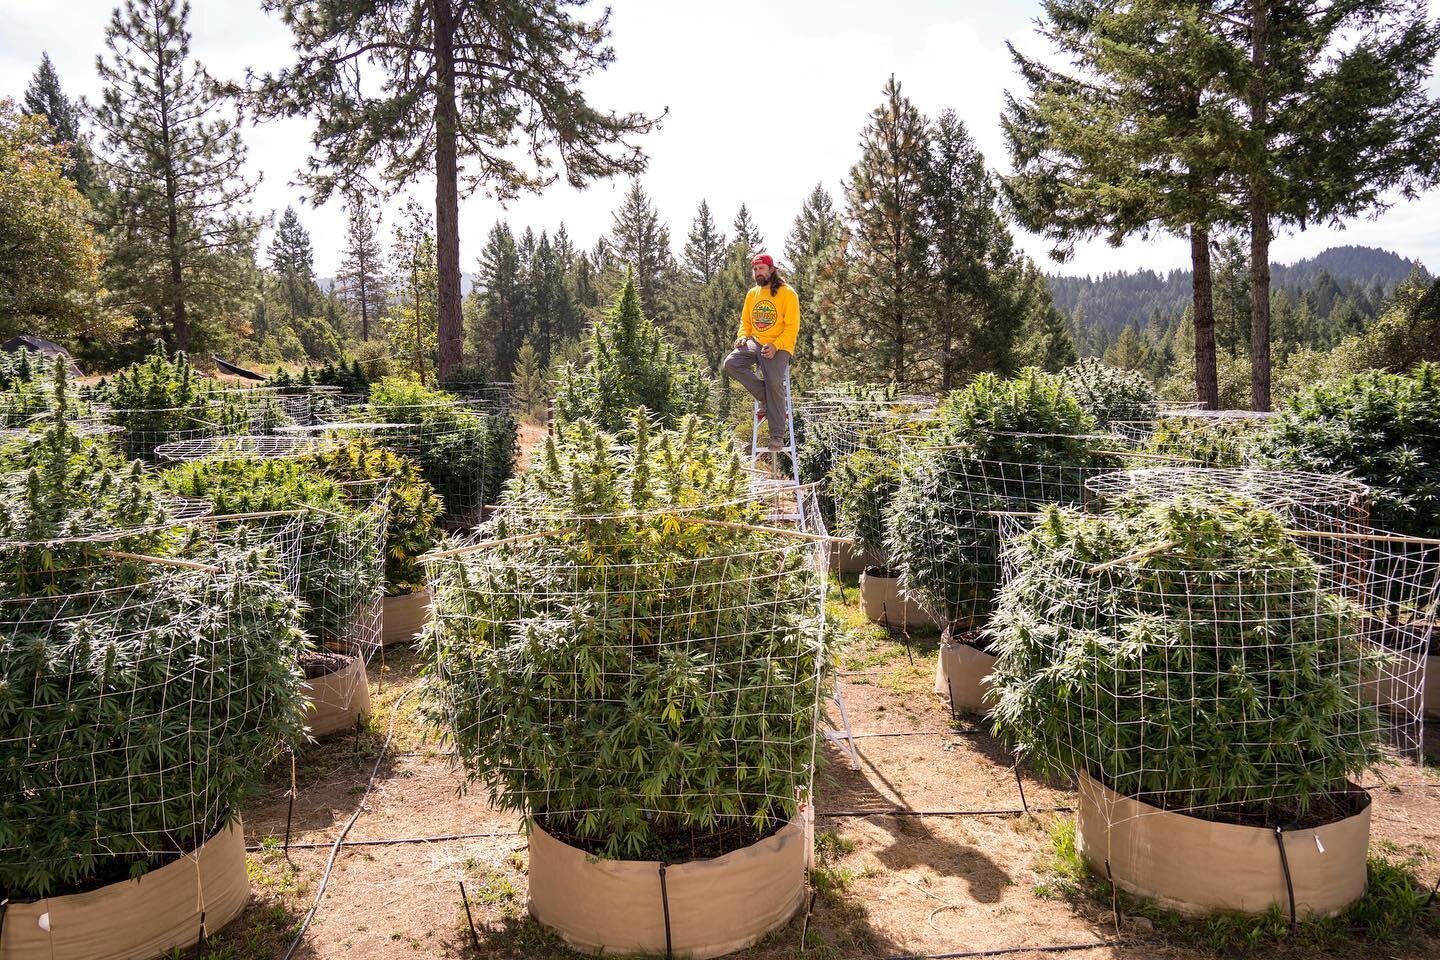 Name a cannabis farm growing trees that you support @stickyfields #stickyfields hanging in the trees. Check out our new long sleeves @ stickyfields.com